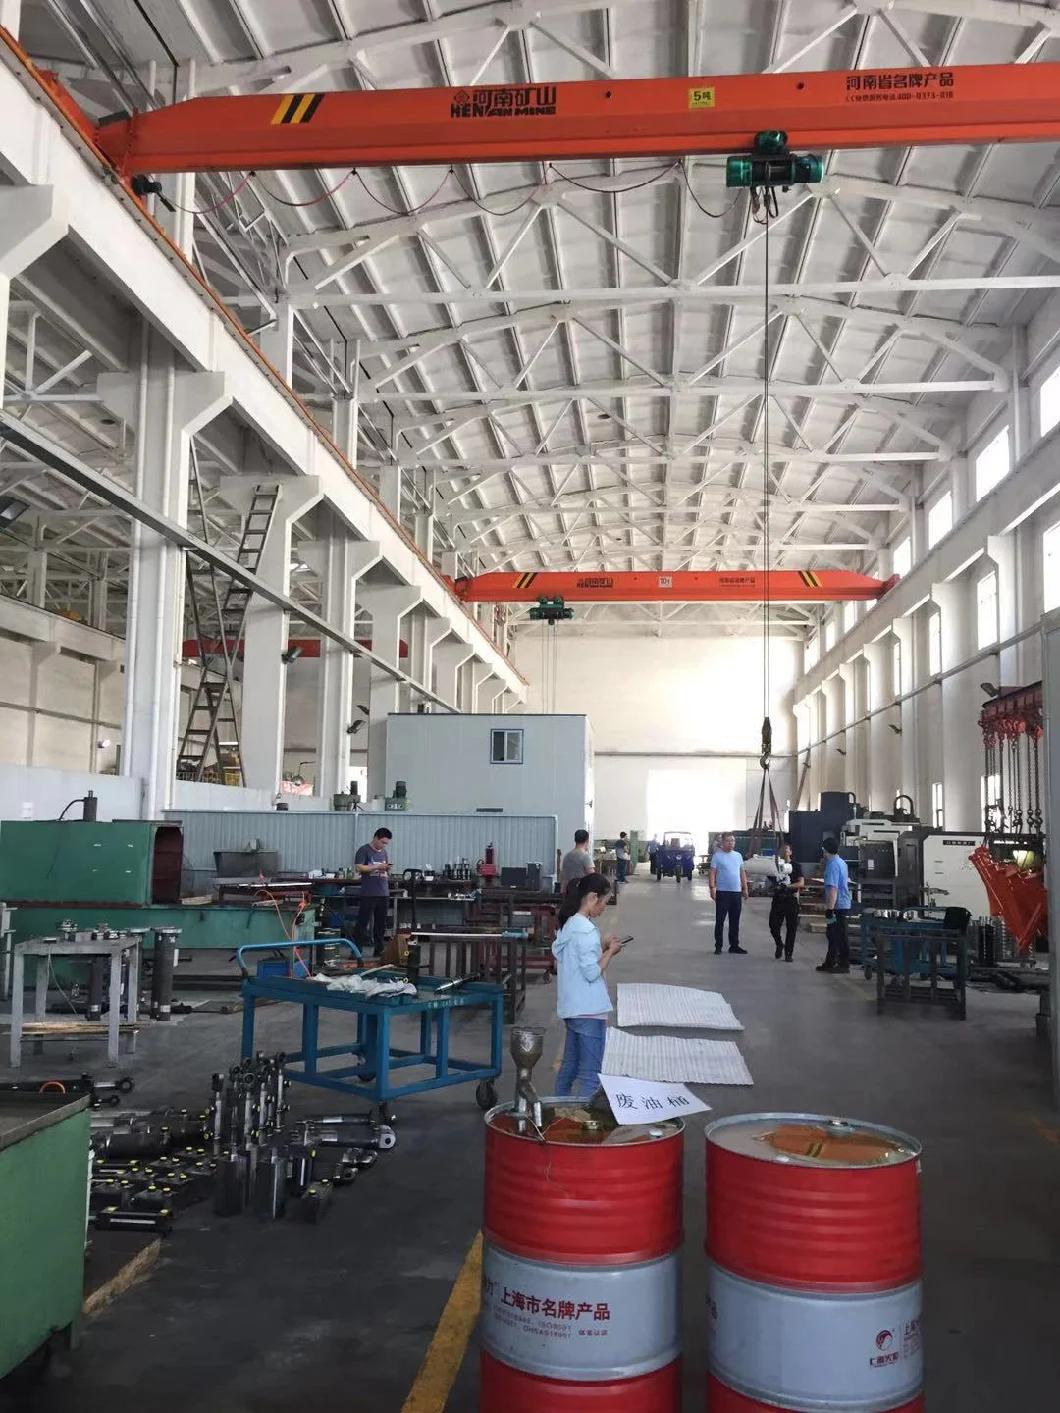 Extrusion Press Hydraulic Cylinder Used for Aluminum Profile Extrusion Machine